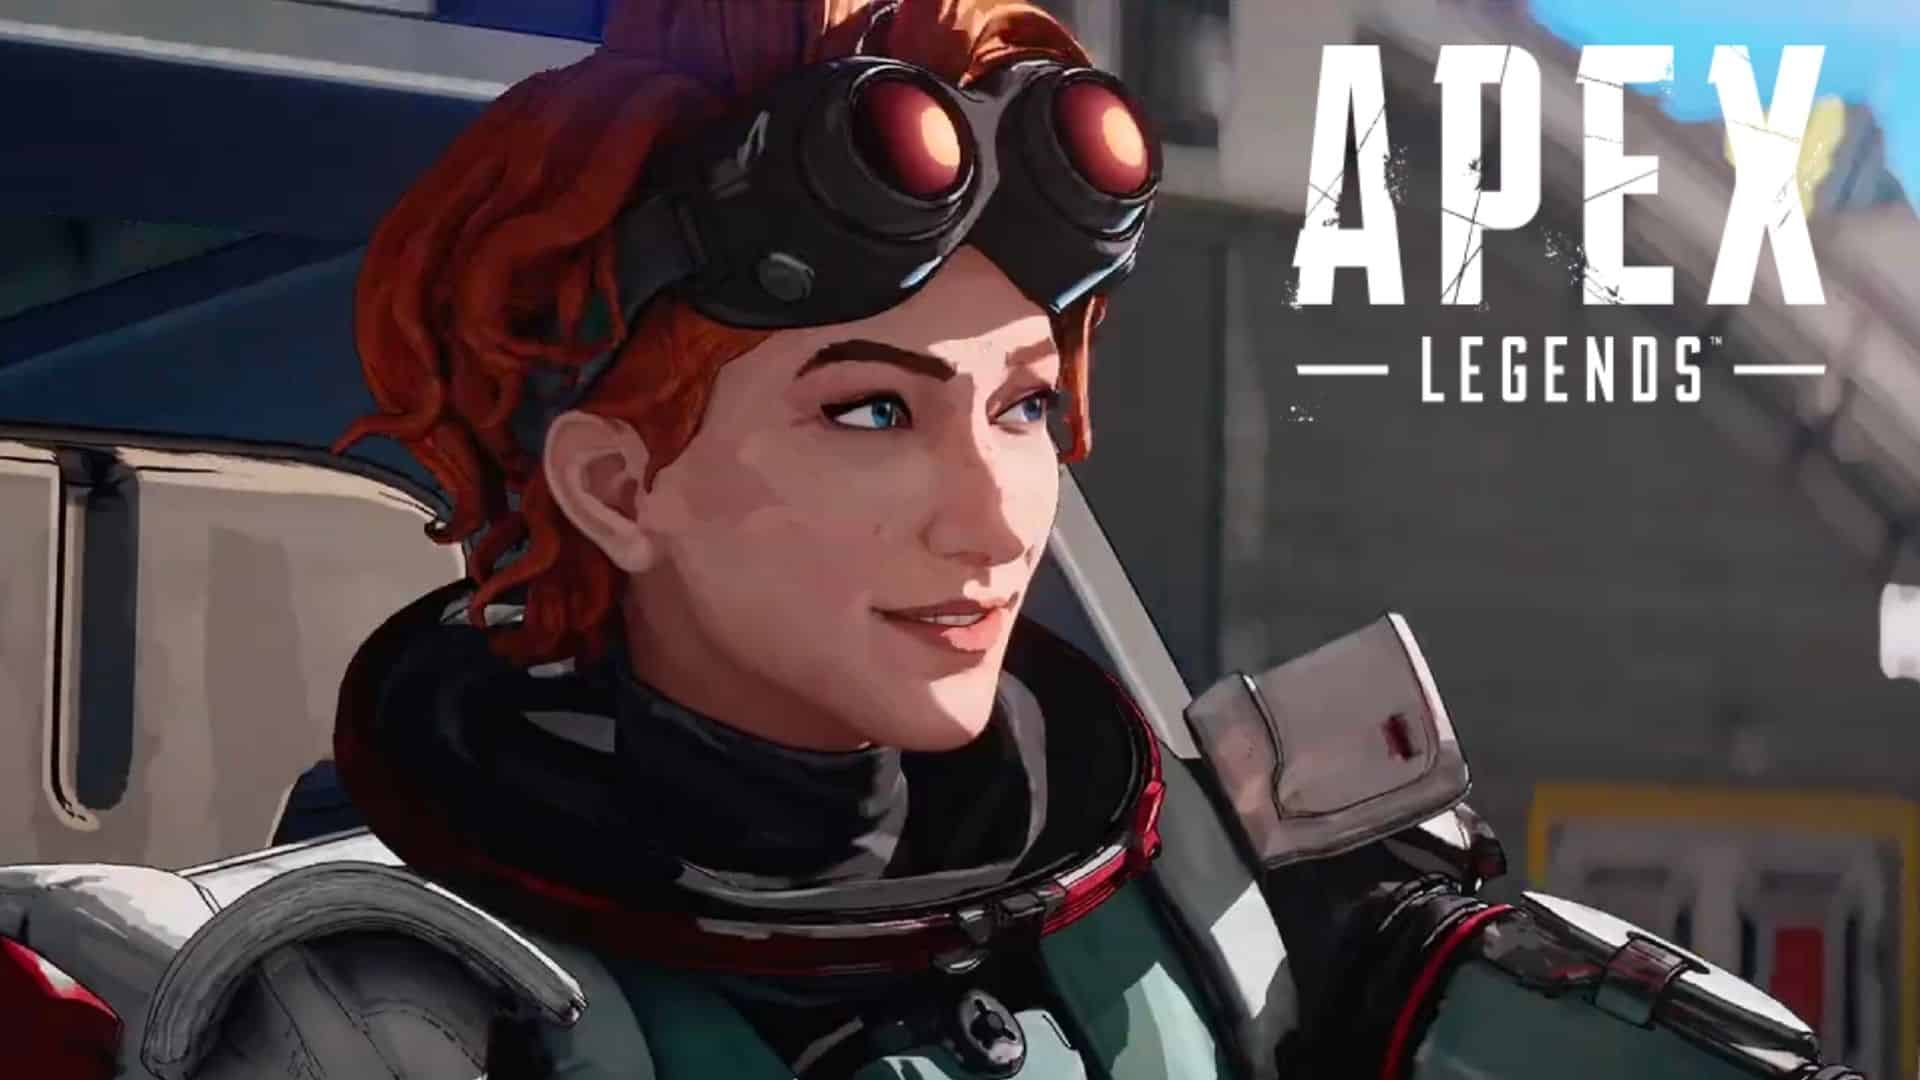 Horizon looking to the right in Apex Legends